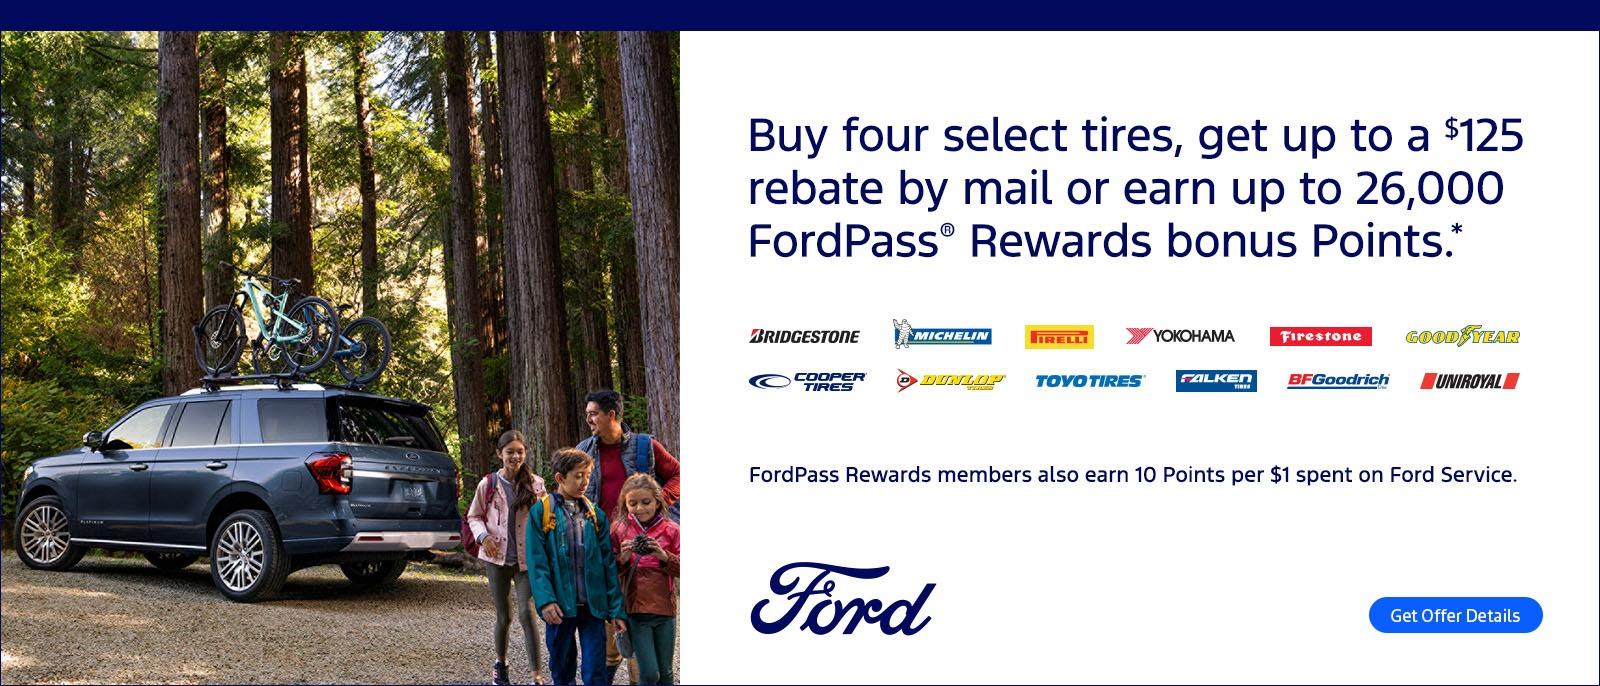 Buy four select tires, get up to a $125 rebate by mail or earn up to 26,000 FordPass® Rewards bonus Points.*